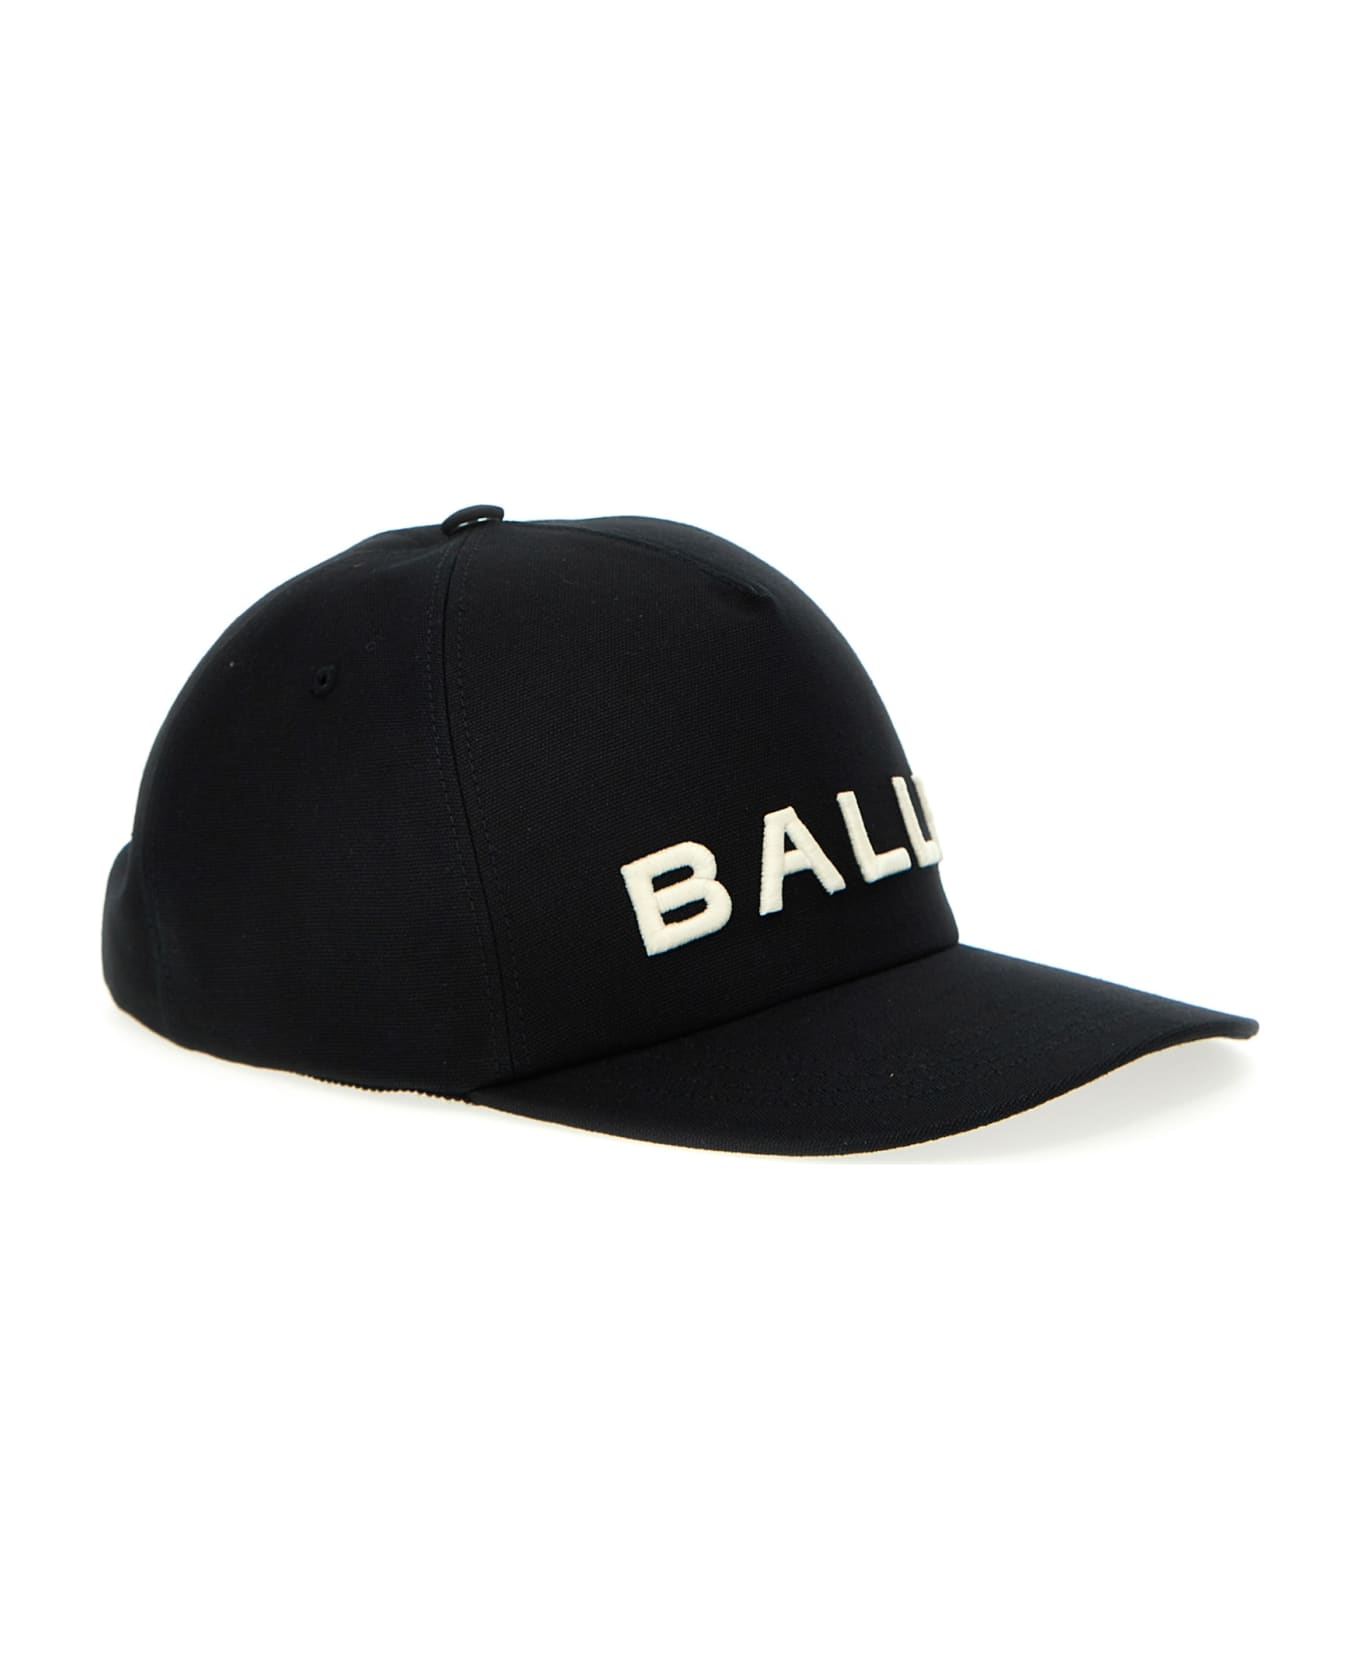 Bally Embroidered Logo Hat - Black